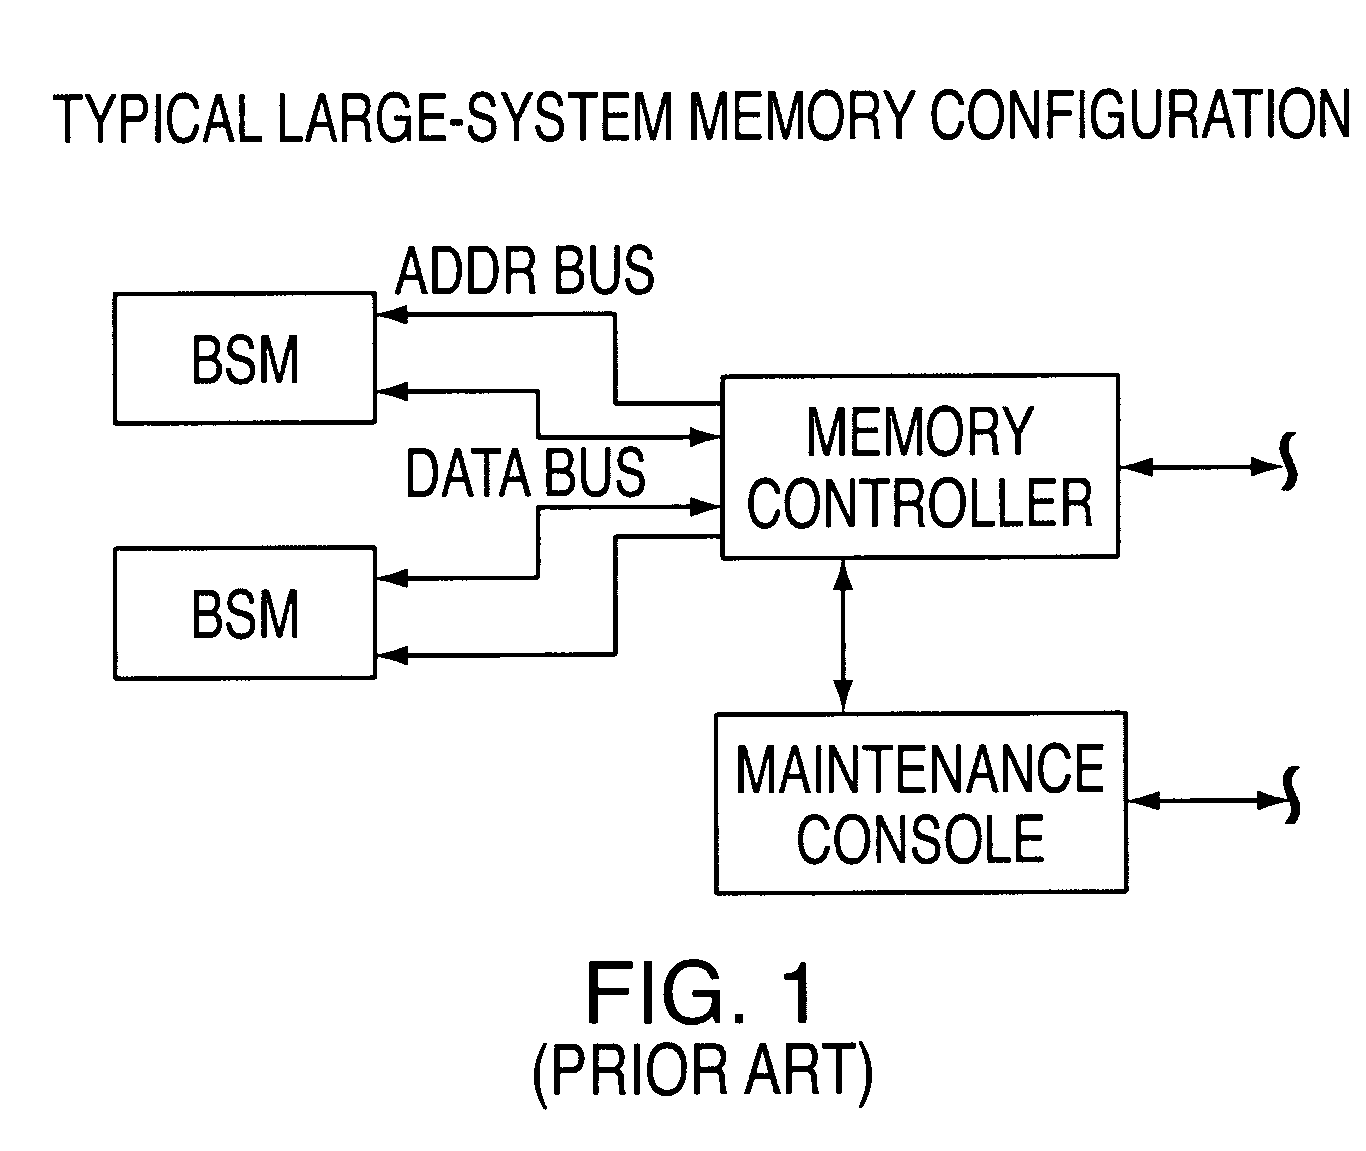 276-Pin buffered memory module with enhanced fault tolerance